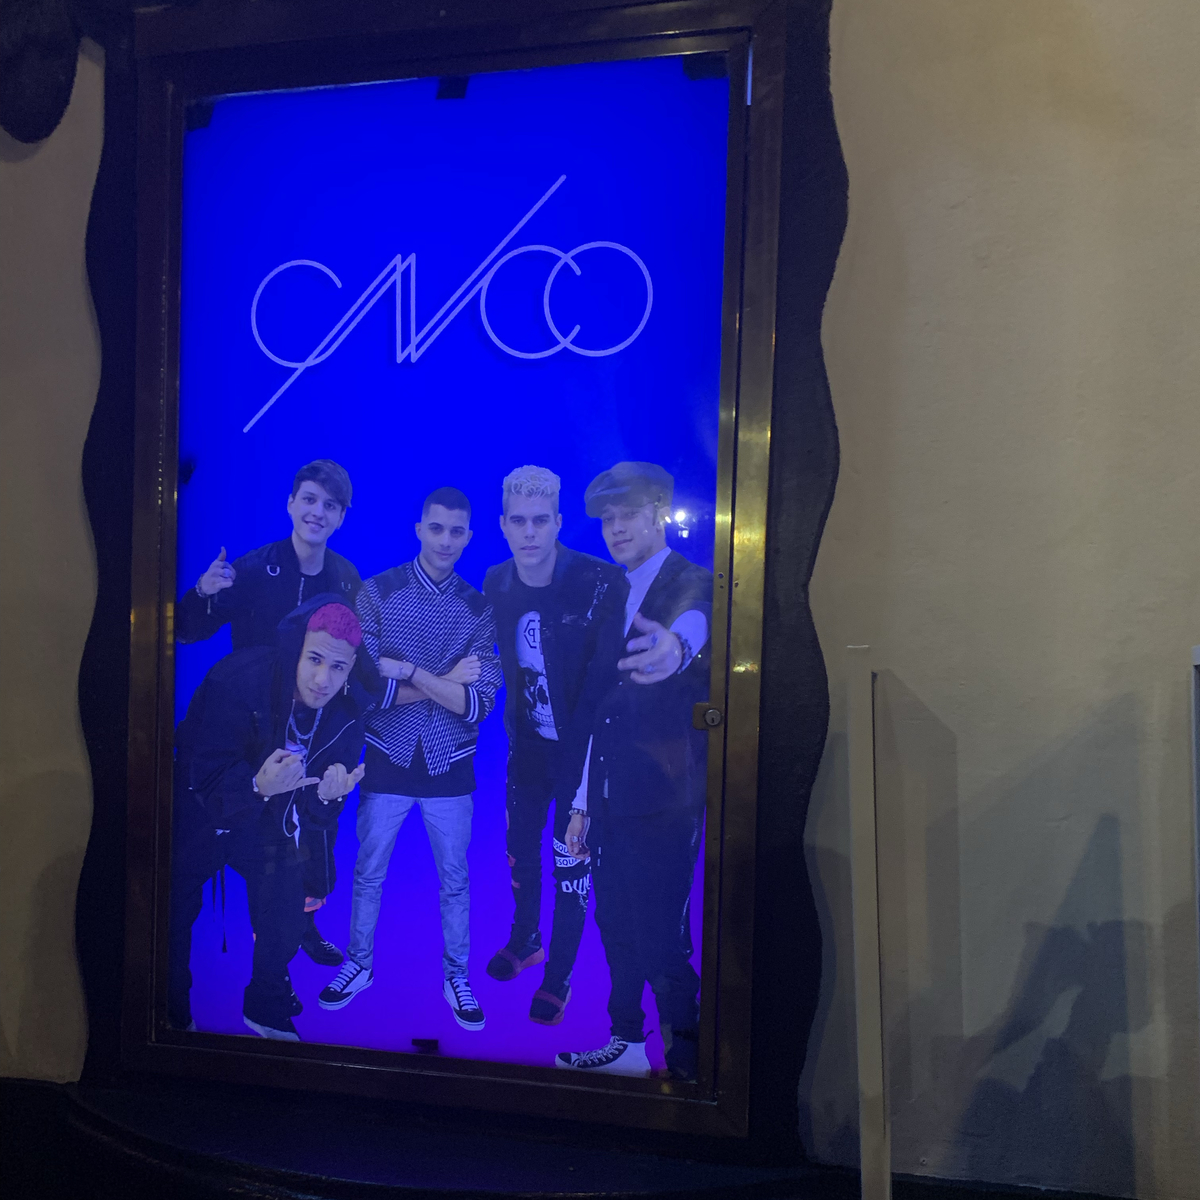 Sep 05, 2019: CNCO at Avalon Hollywood Los Angeles, California, United  States | Concert Archives